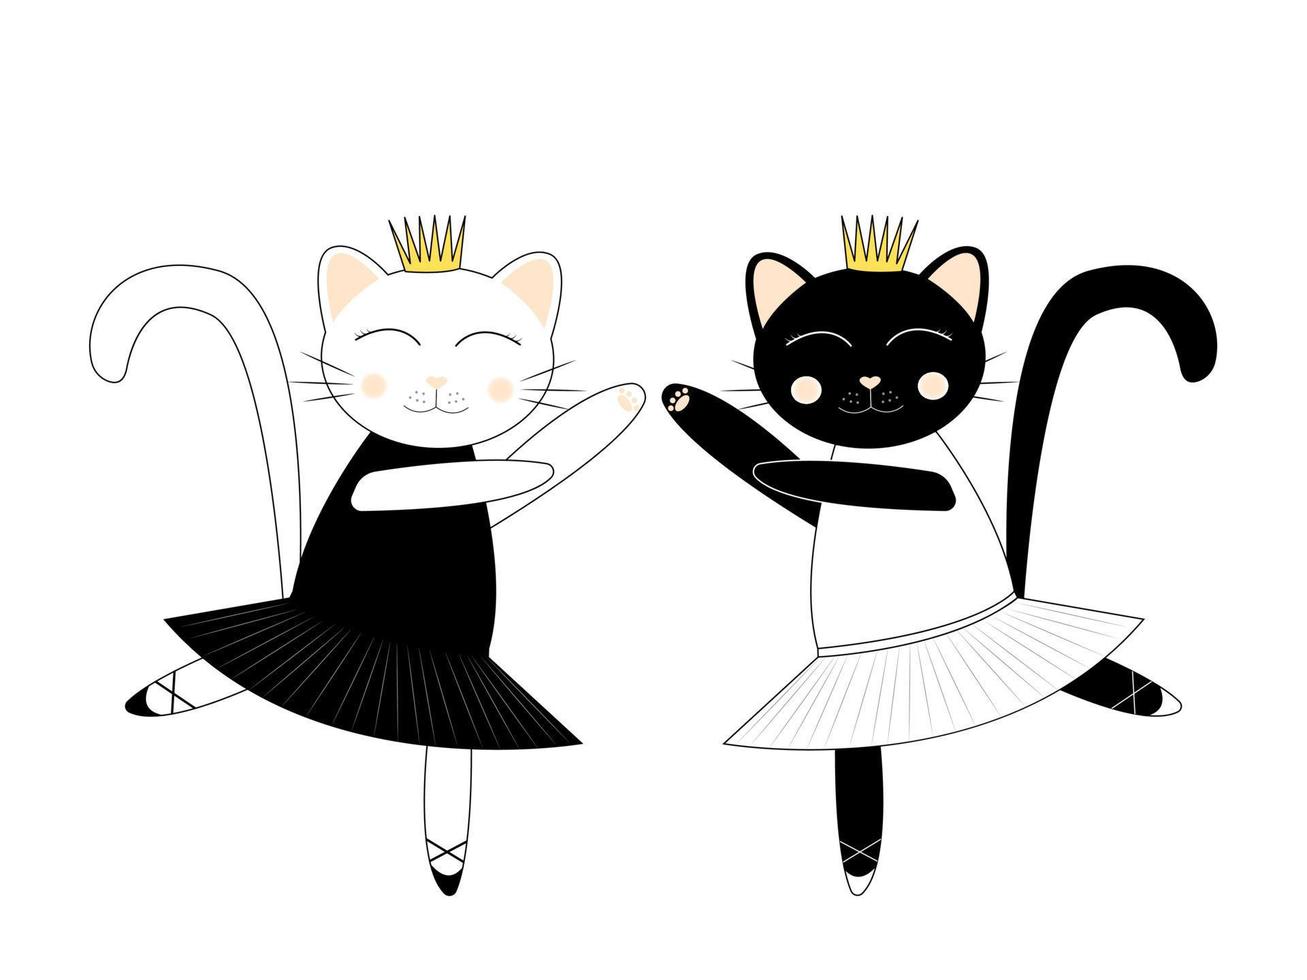 Cute cartoon characters. White and black ballerina cats. Swan Lake ballet. Vector illustration isolated on white background